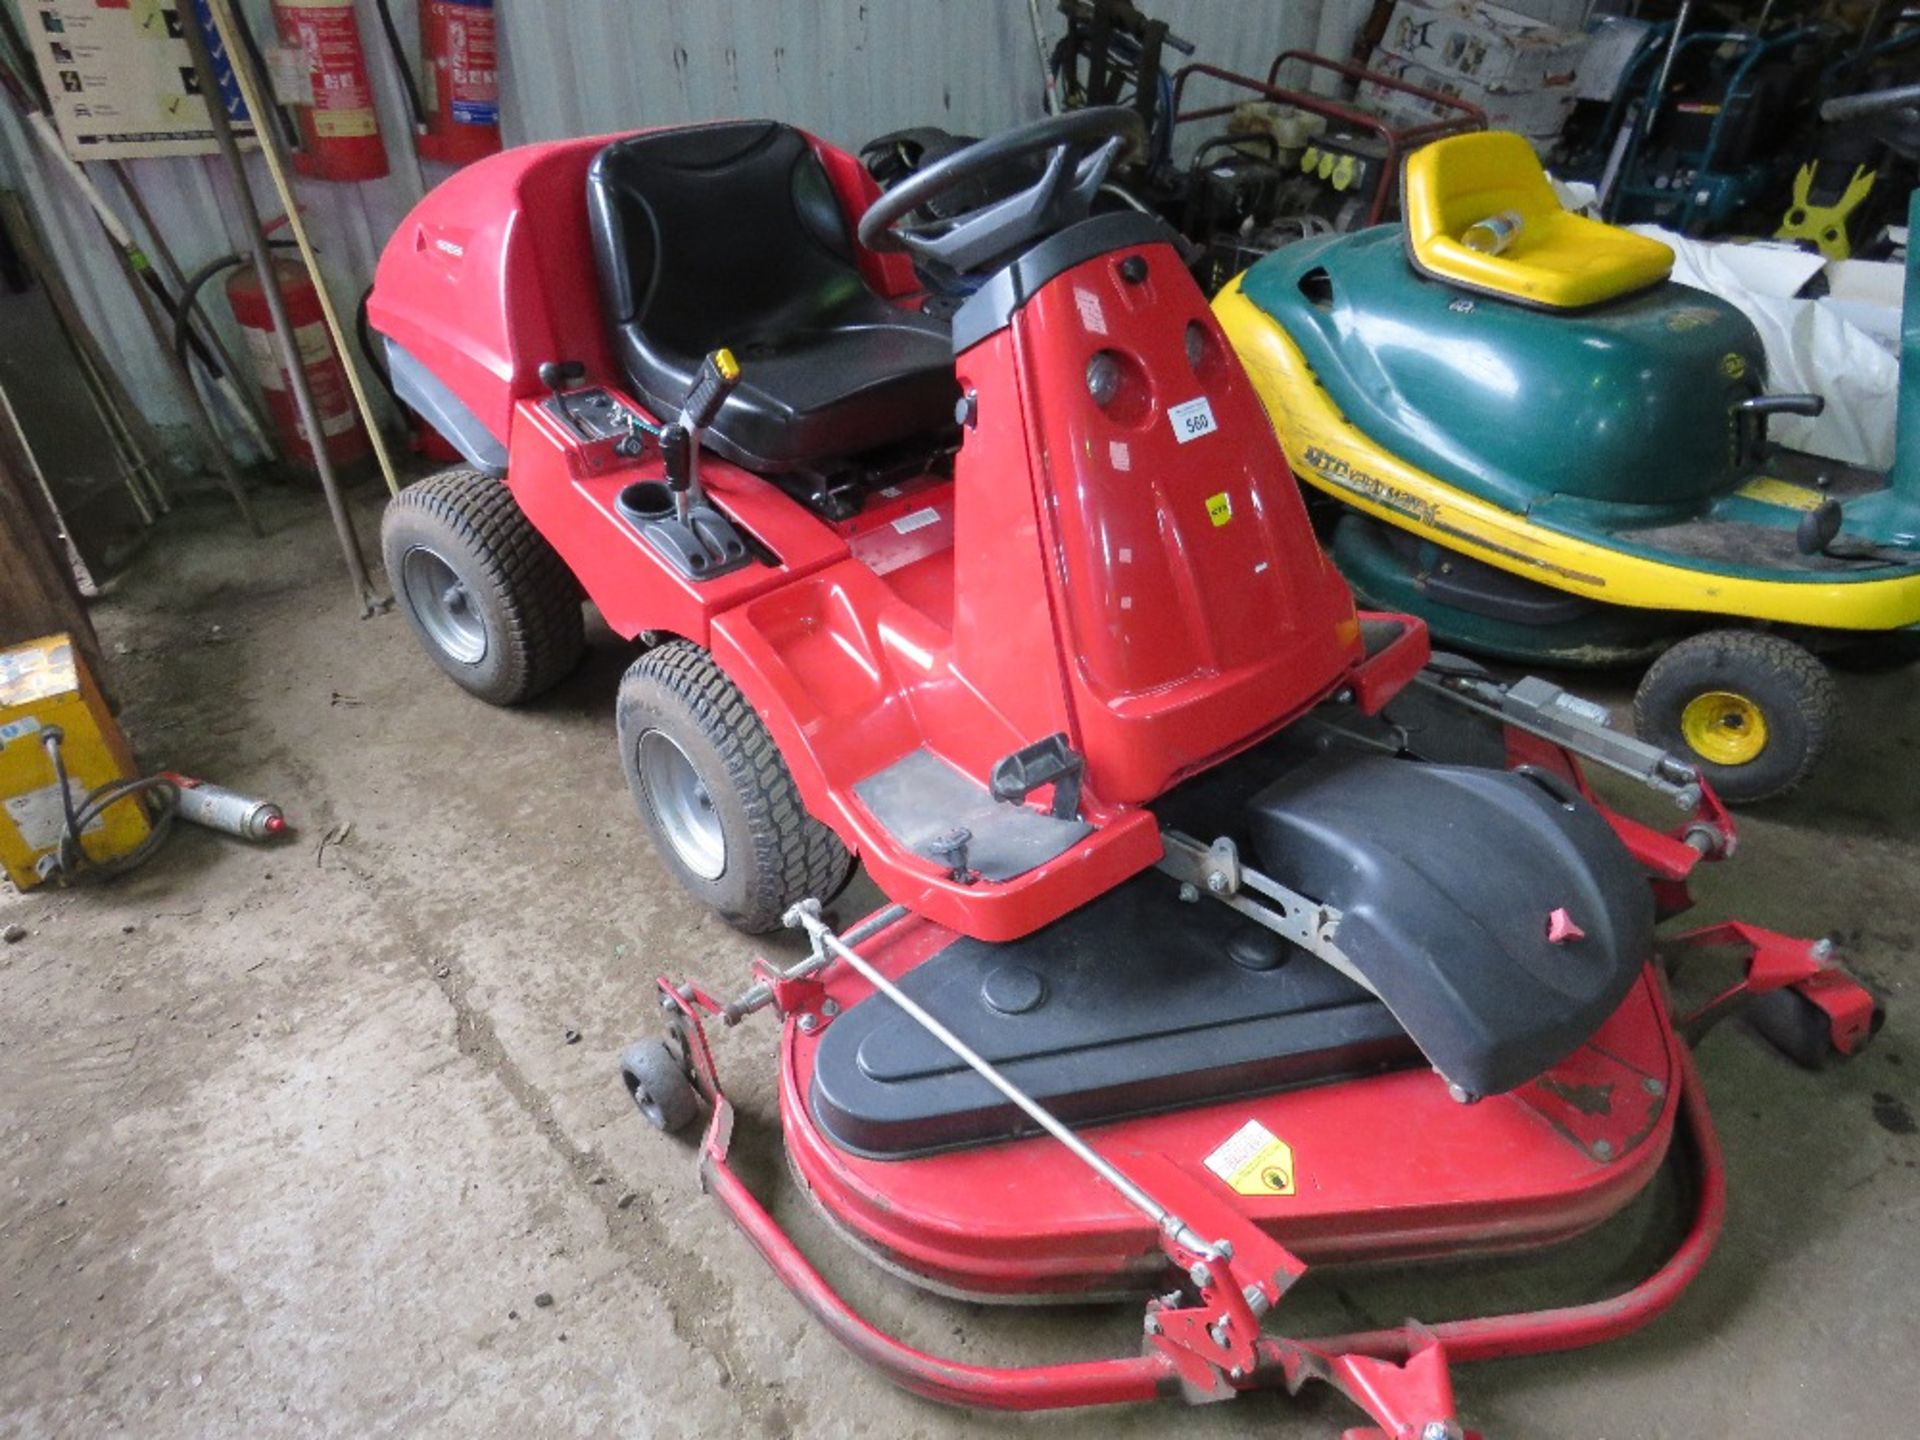 COUNTAX OUTFRONT RIDE ON MOWER, 1.3M DECK, KAWASAKI 25HP ENGINE. WHEN TESTED WAS SEEN TO RUN, DRIVE,